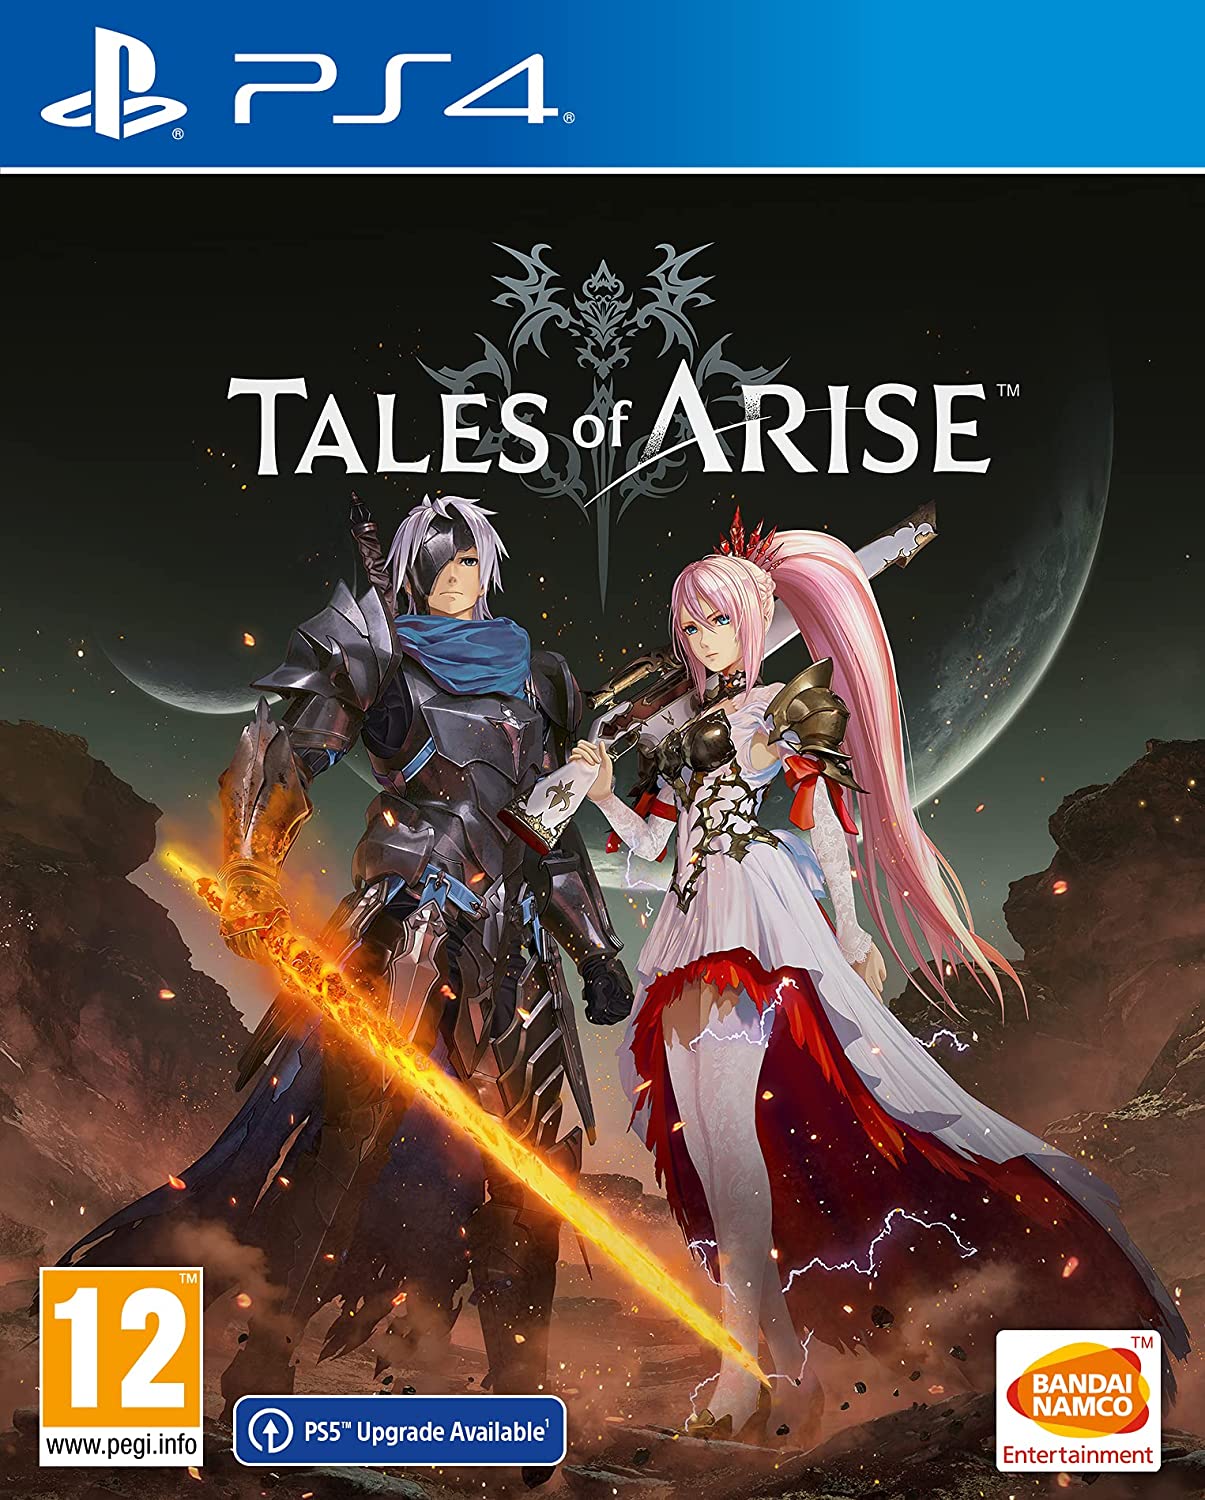 JUEGO PS4 TALES OF ARISE